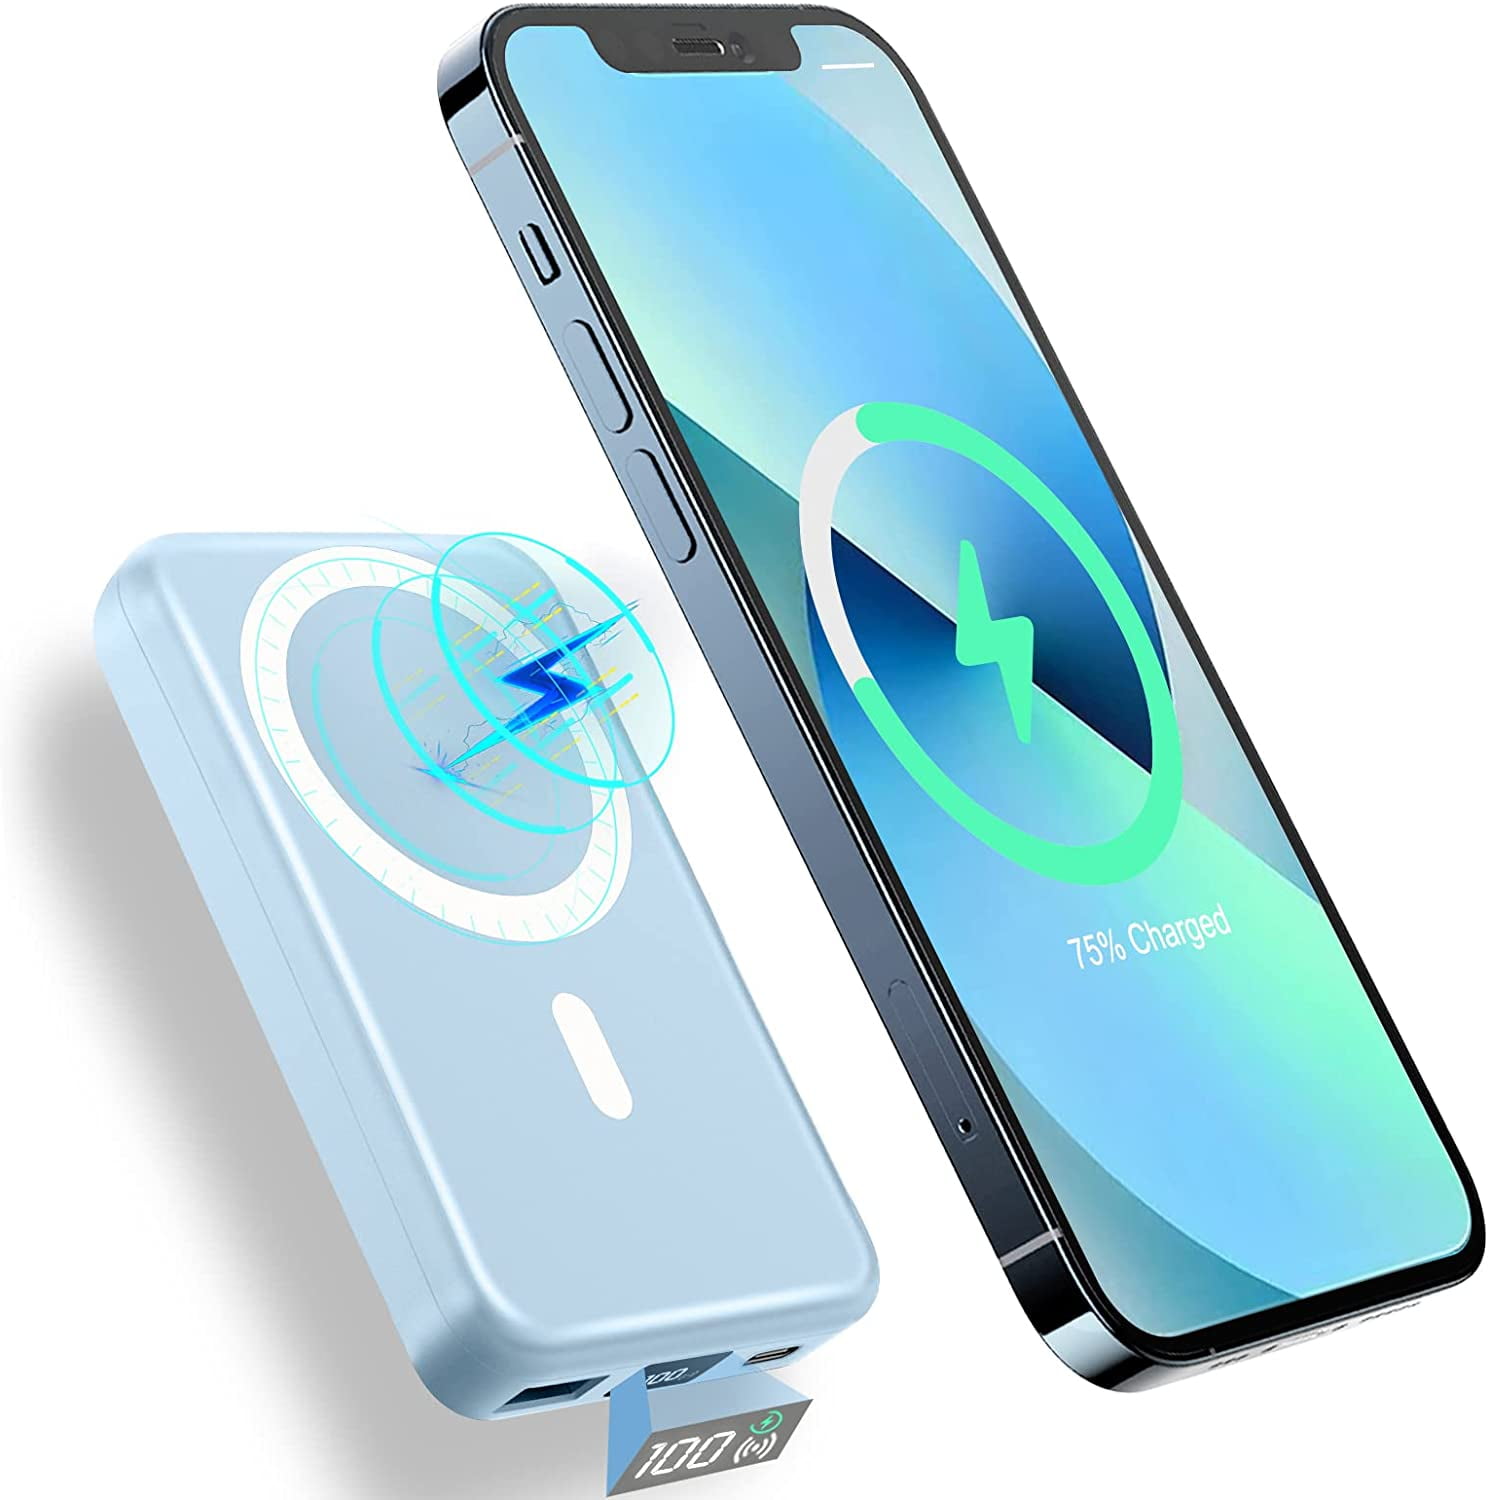 VCME Magnetic Wireless Power Bank for iPhone 12, 13, 14 Pro Max,  Qi-Compatible Compact Portable Charger W/USB Type C, Battery Bank for  Wireless or